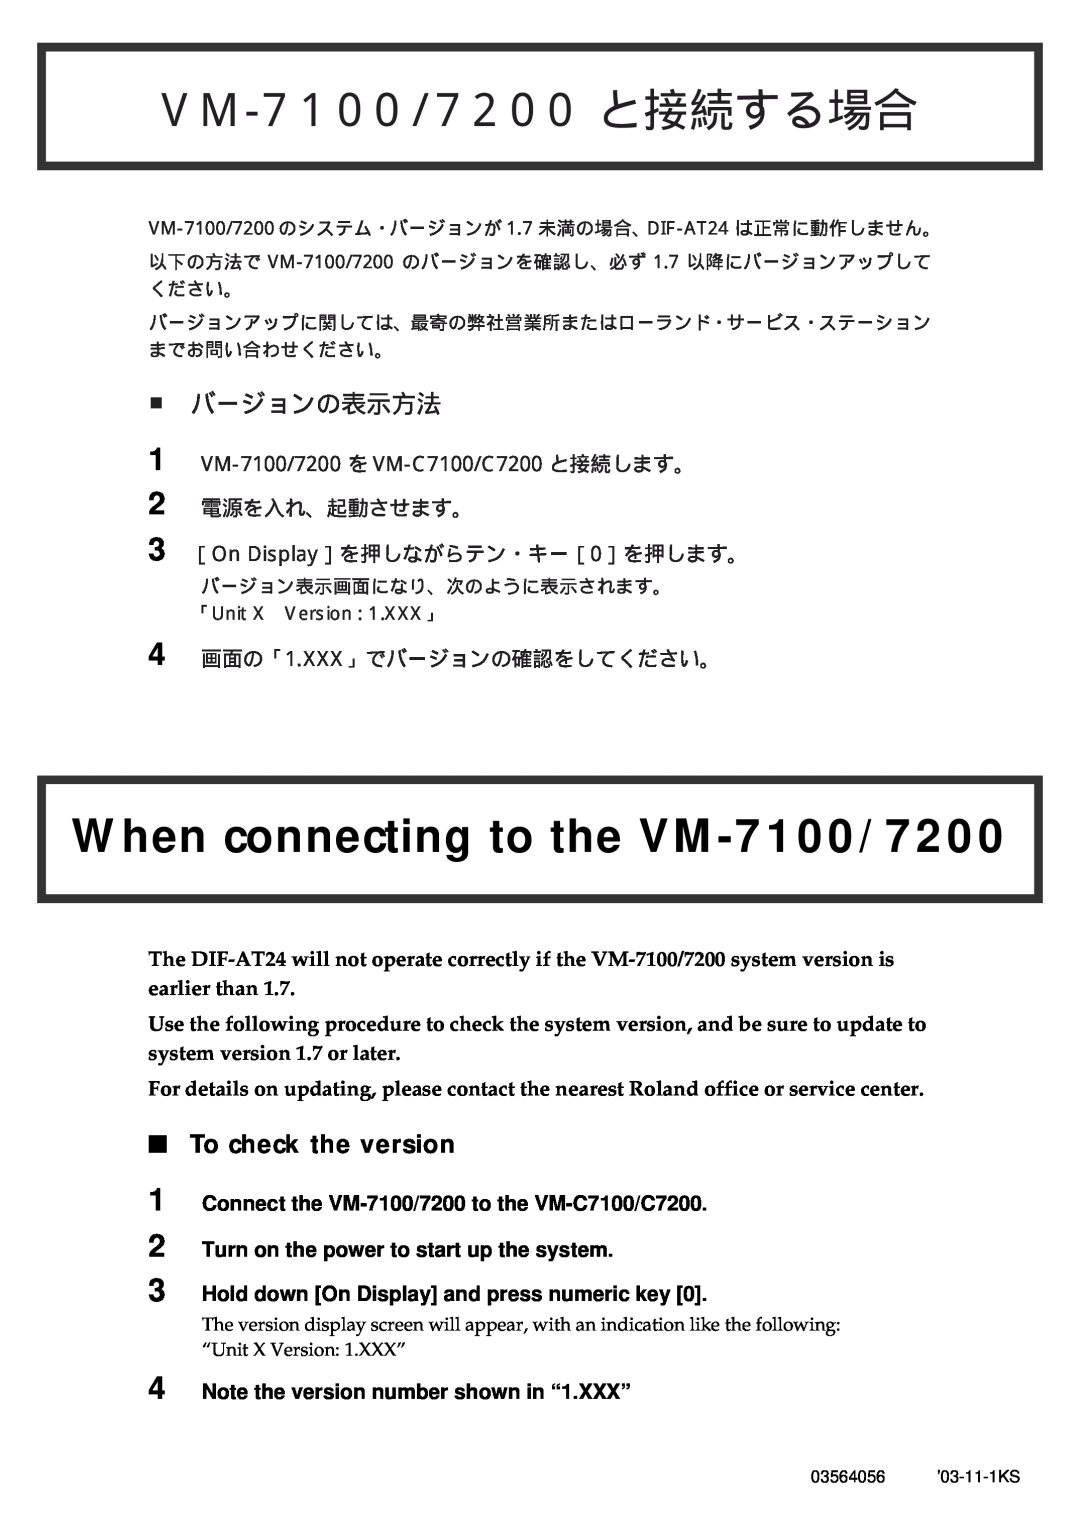 Roland DIF-AT24 owner manual To check the version, VM-7100/7200 と接続する場合, When connecting to the VM-7100/7200, バージョンの表示方法 